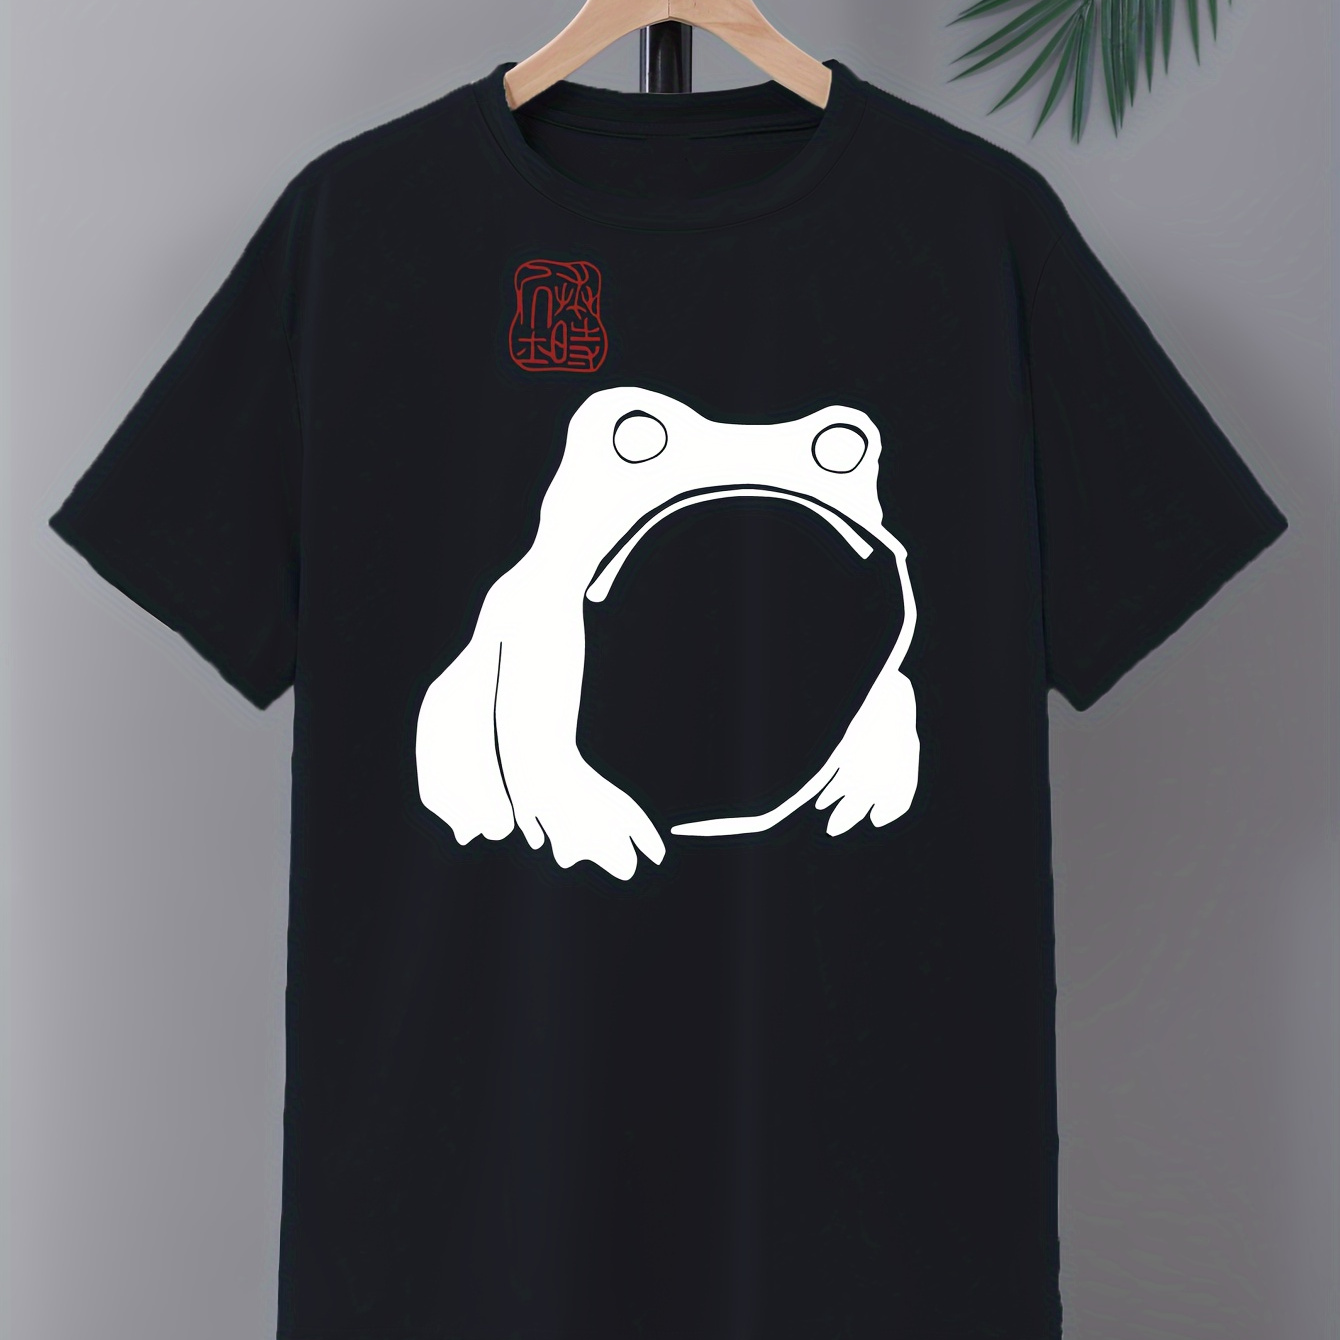 

Frog Print Men's Crew Neck Fashionable Short Sleeve Sports T-shirt, Comfortable And Versatile, For Summer And Spring, Athletic Style, Comfort Fit T-shirt, As Gifts